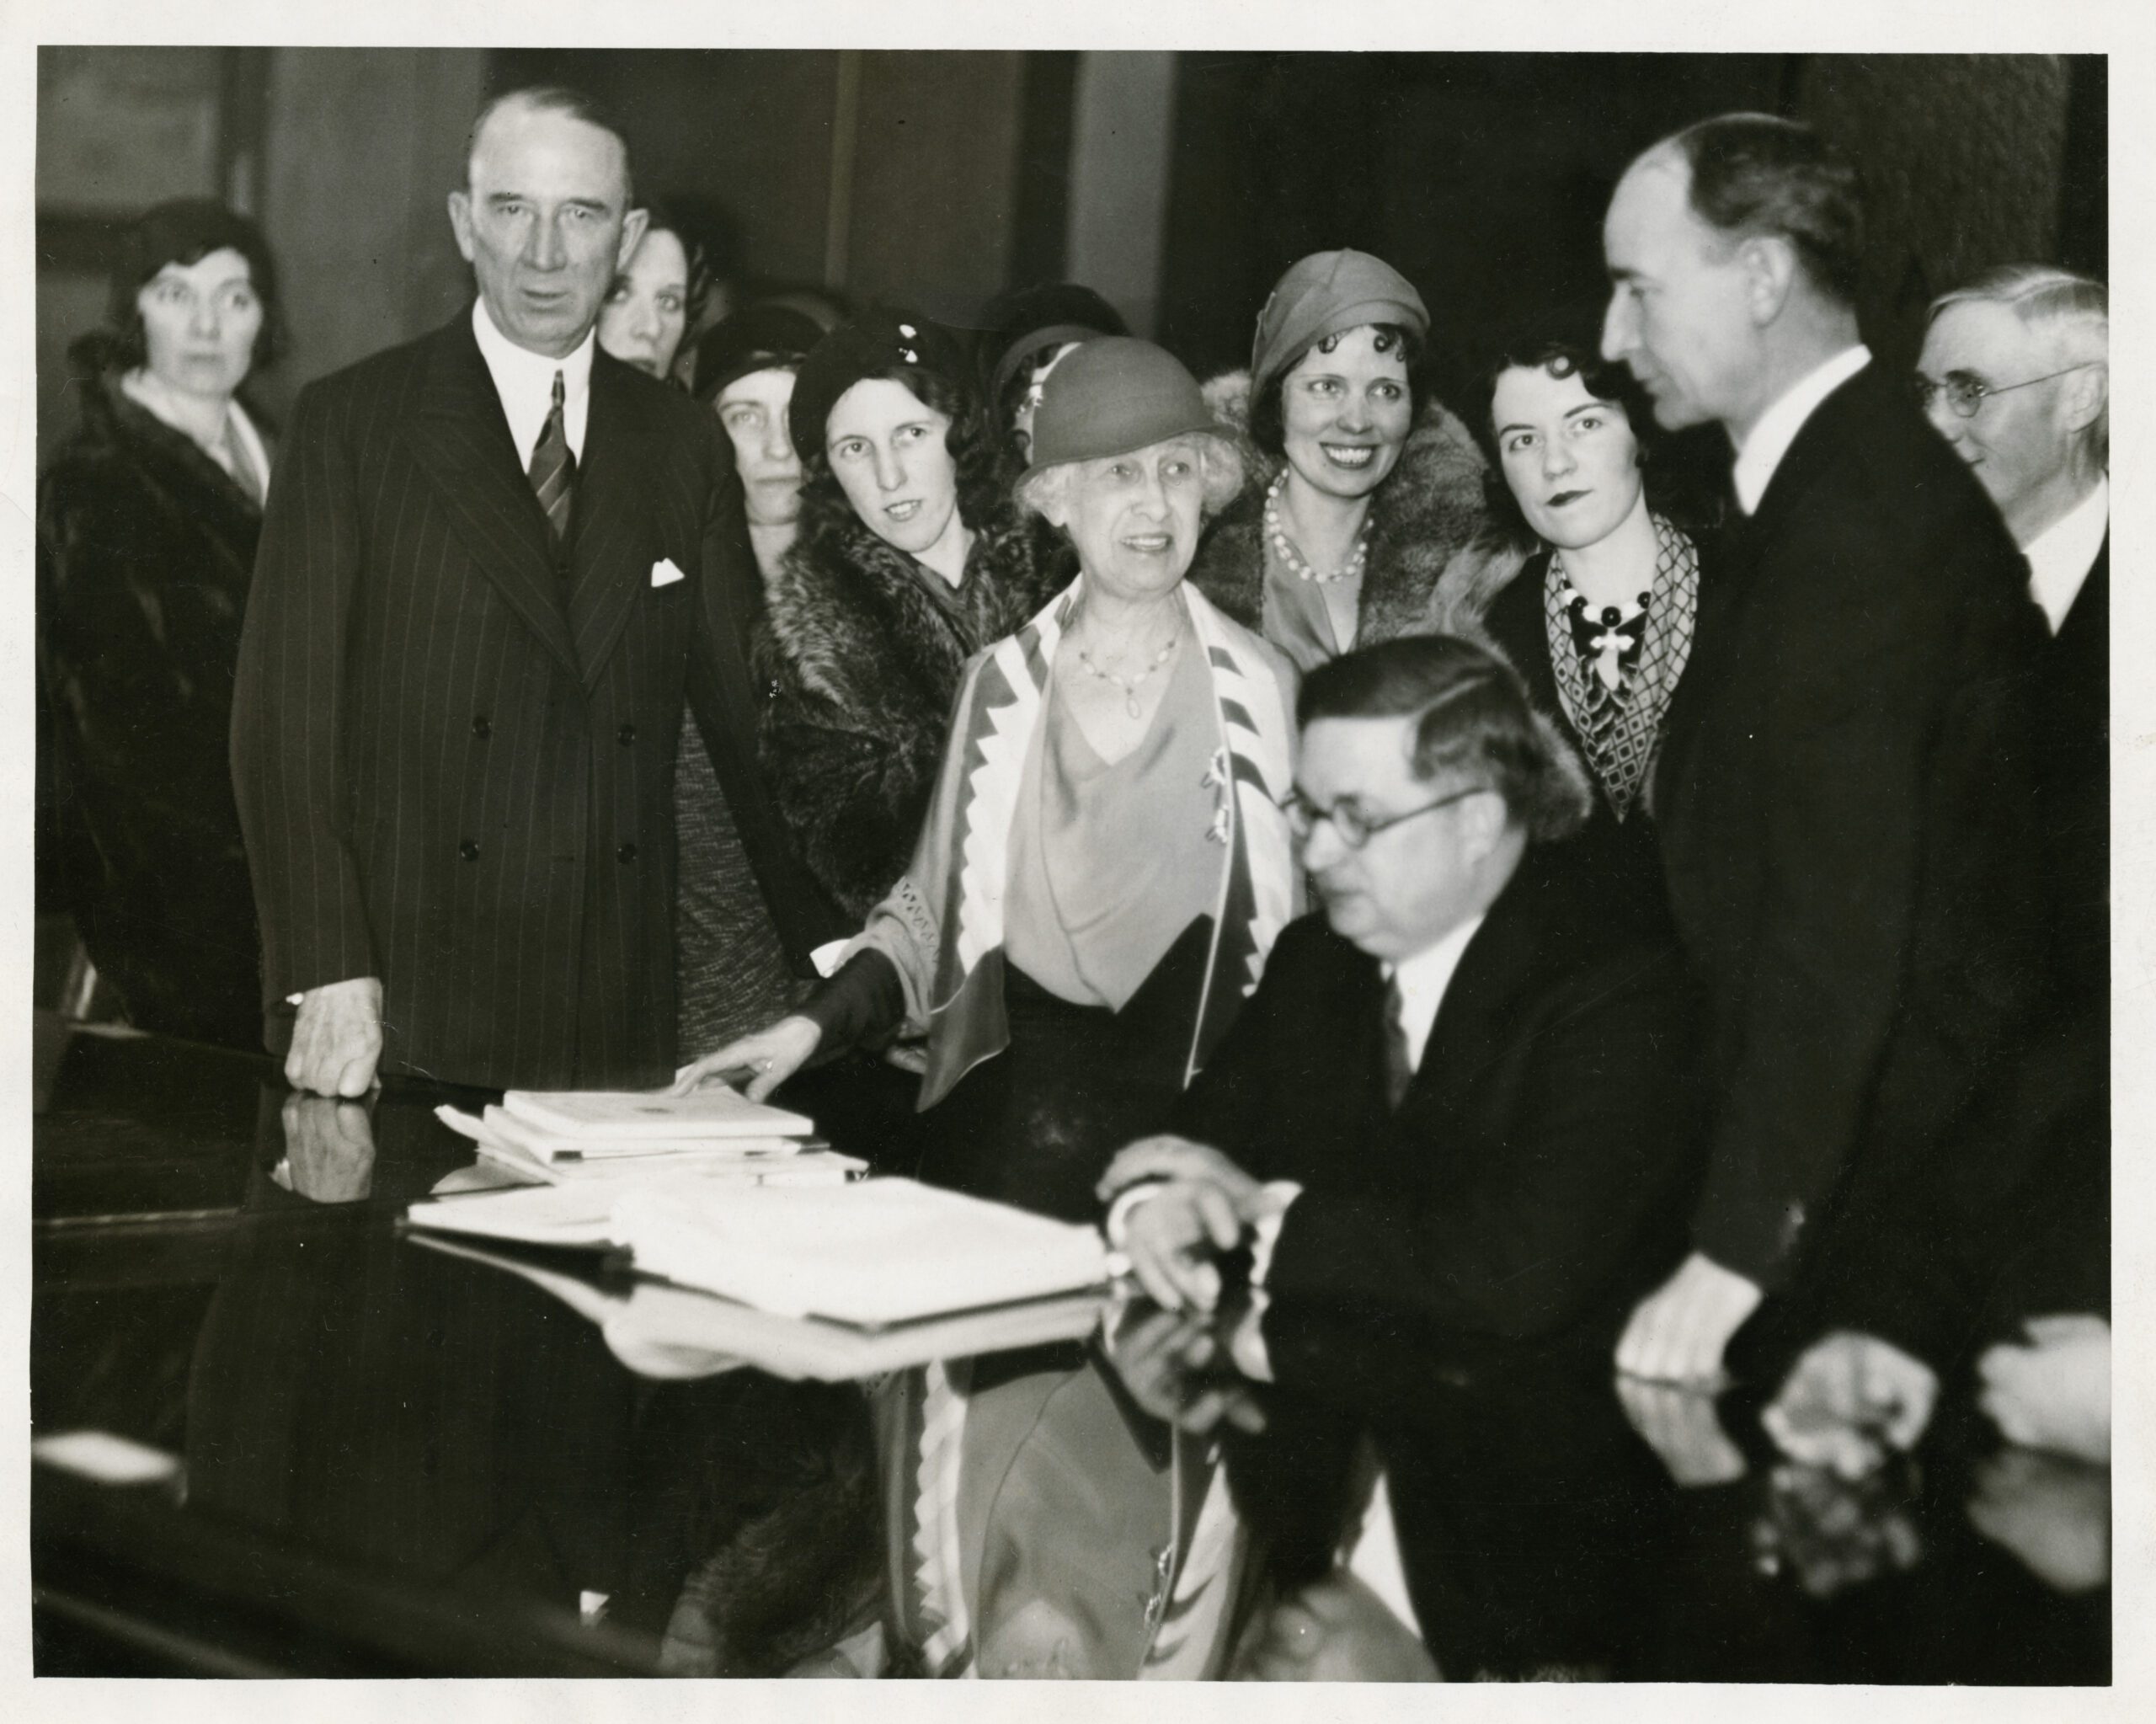 Margaret Haley and several other women stand in a group of men at a desk in 1932